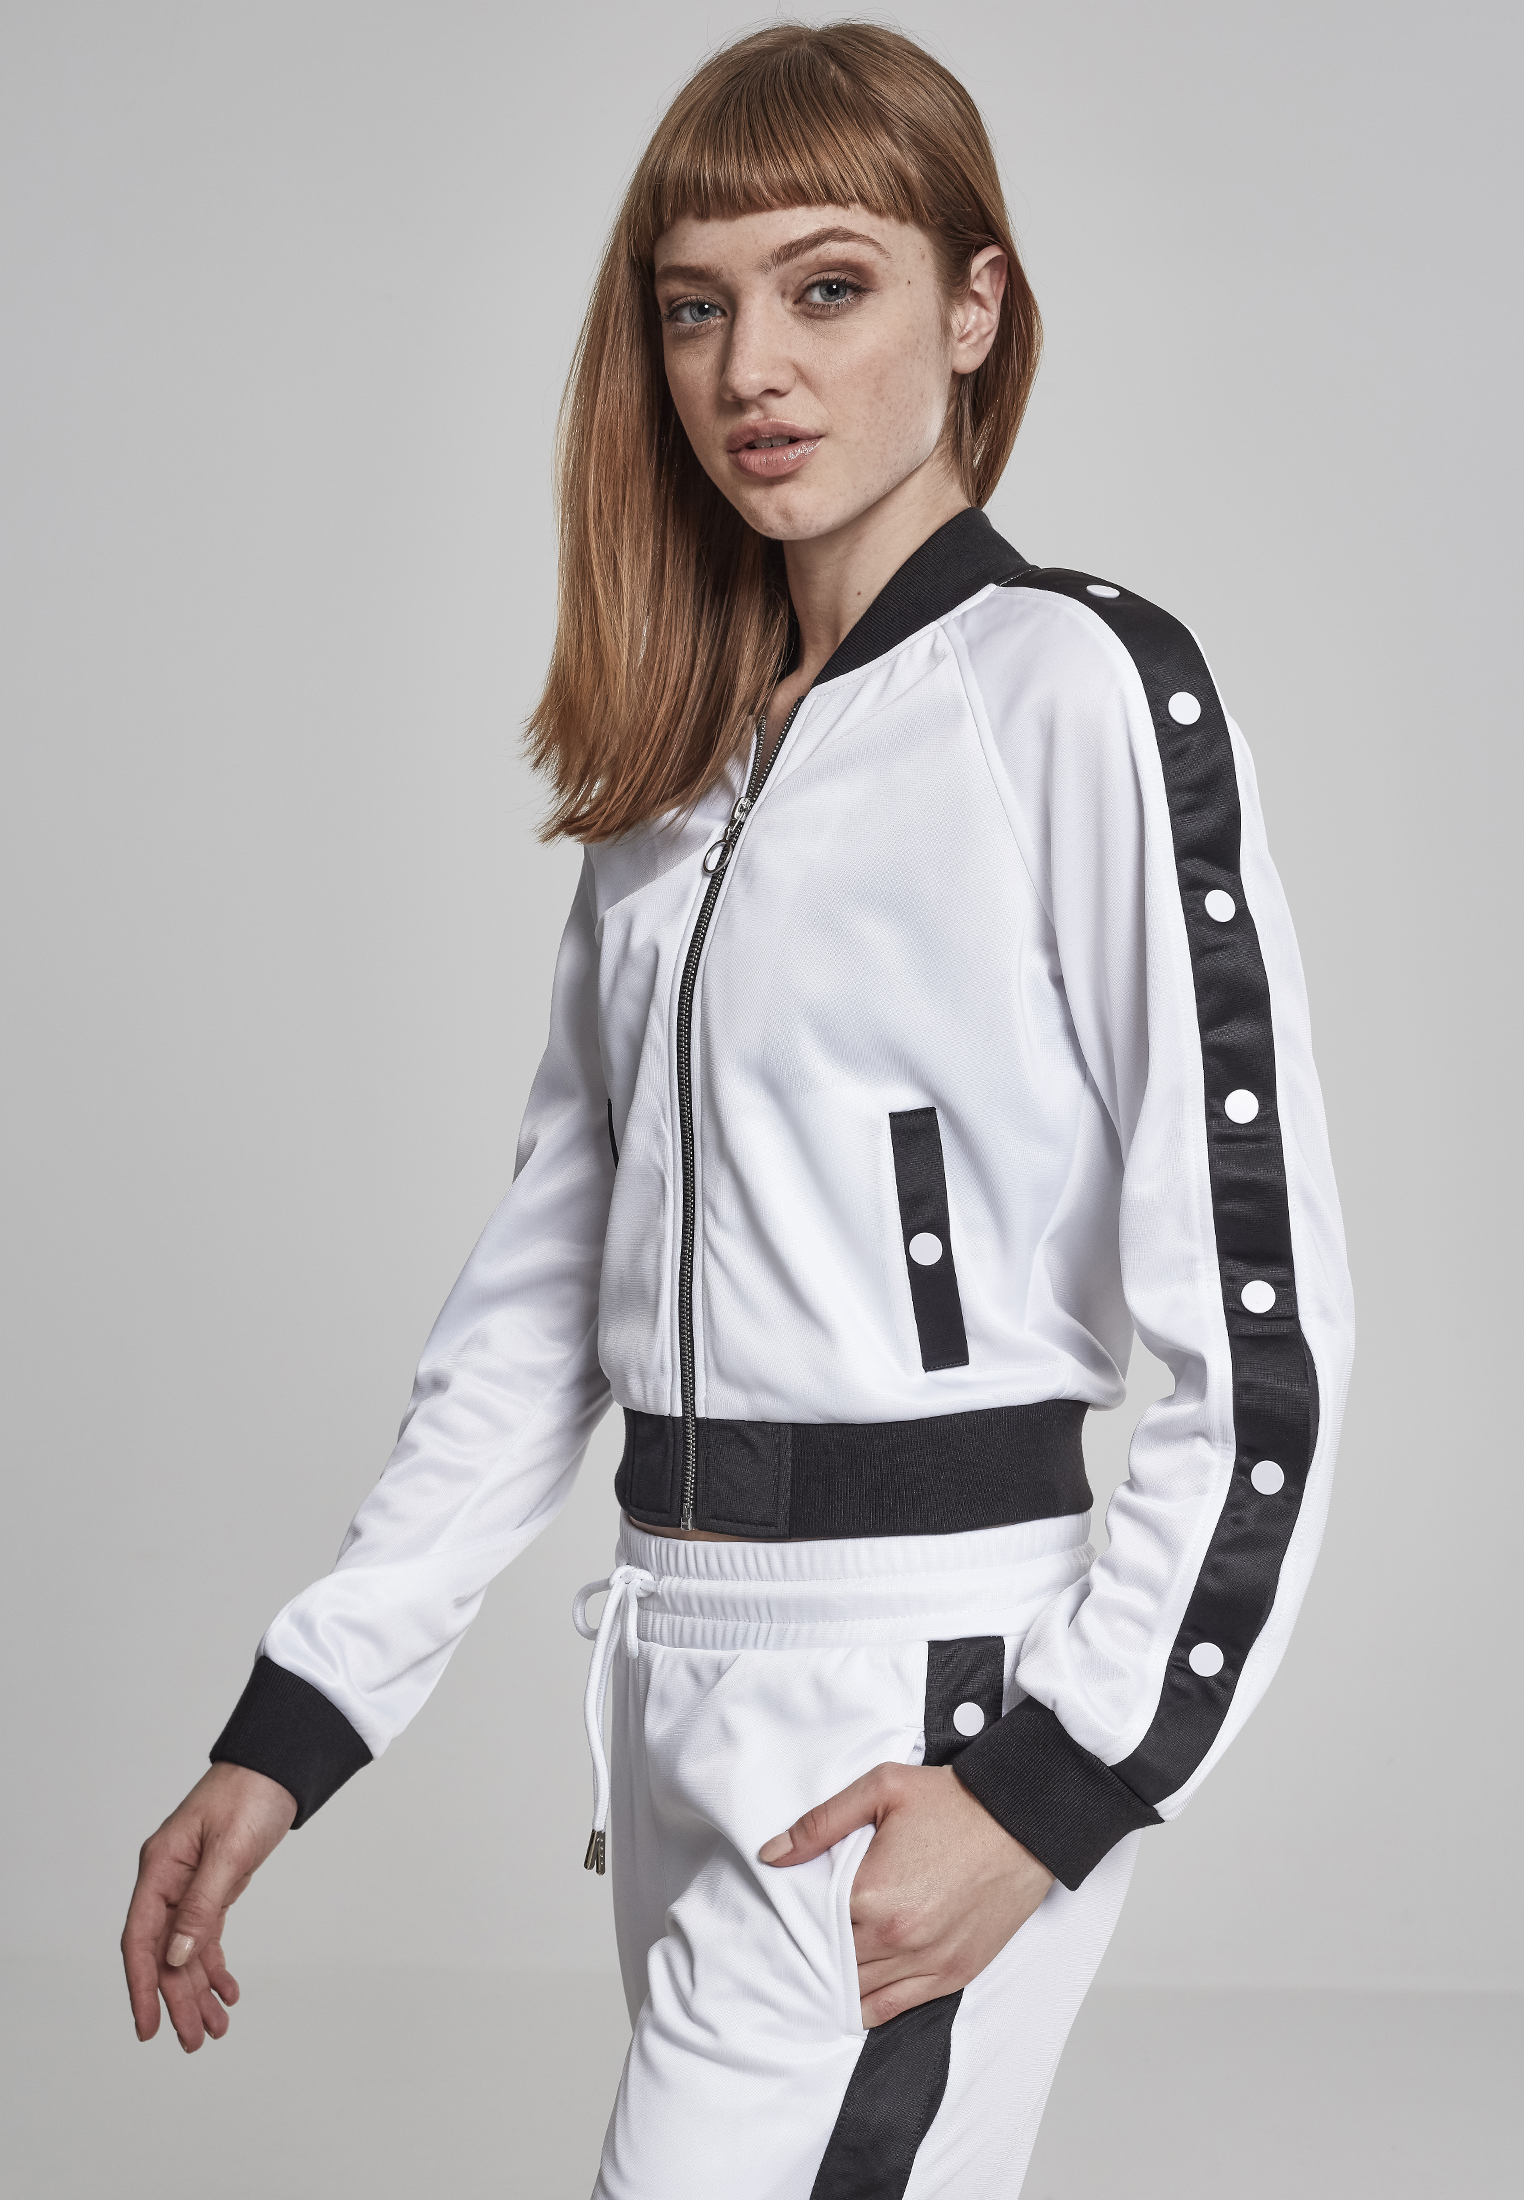 Light Jackets Ladies Button Up Track Jacket in Farbe wht/blk/wht